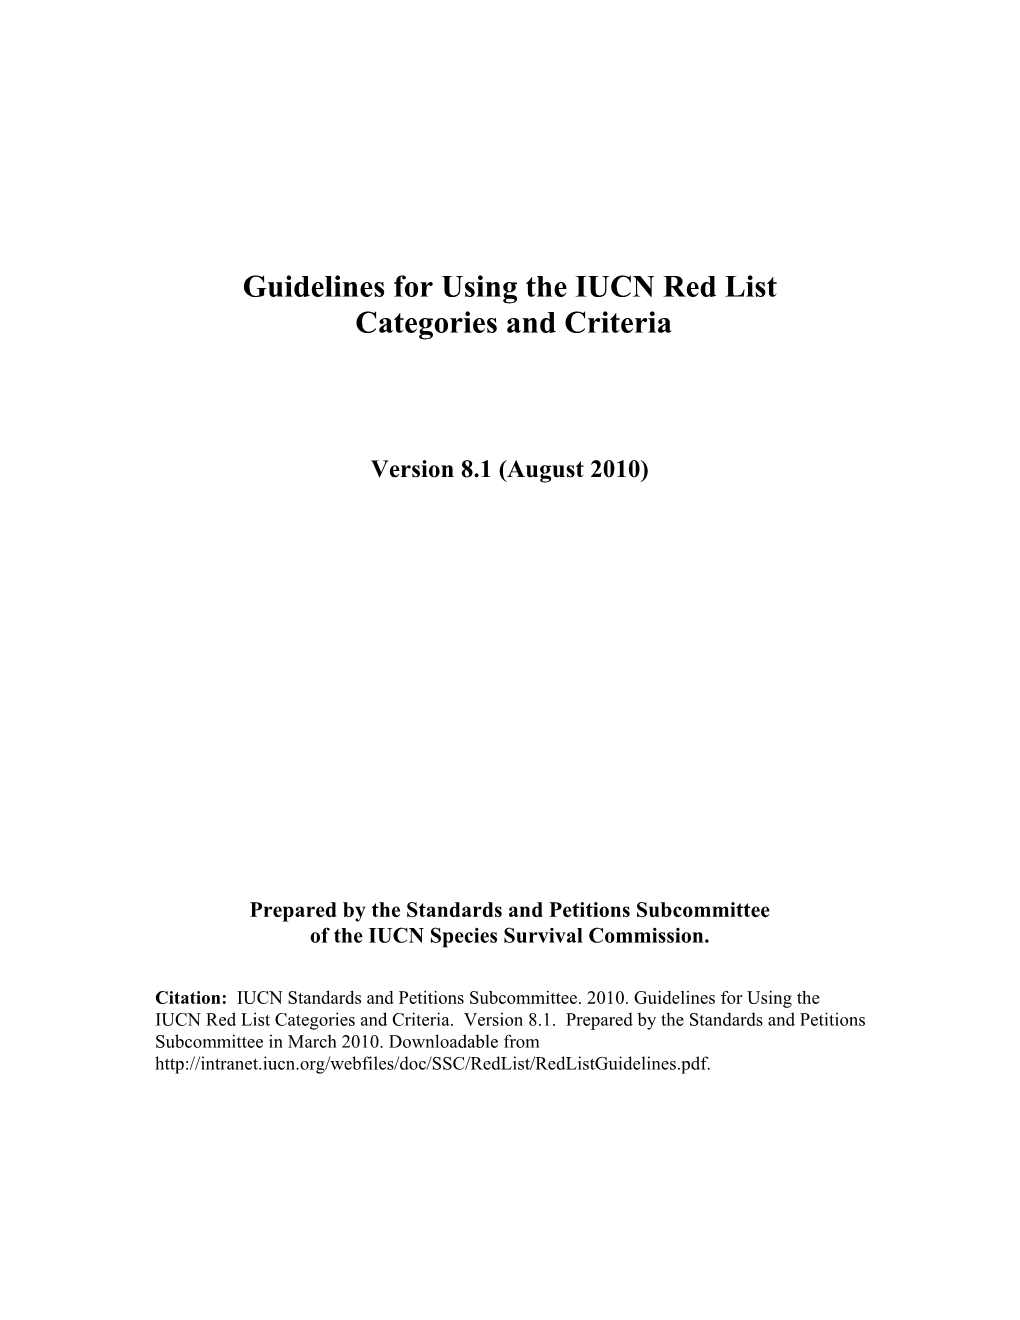 Guidelines for Using the IUCN Red List Categories and Criteria